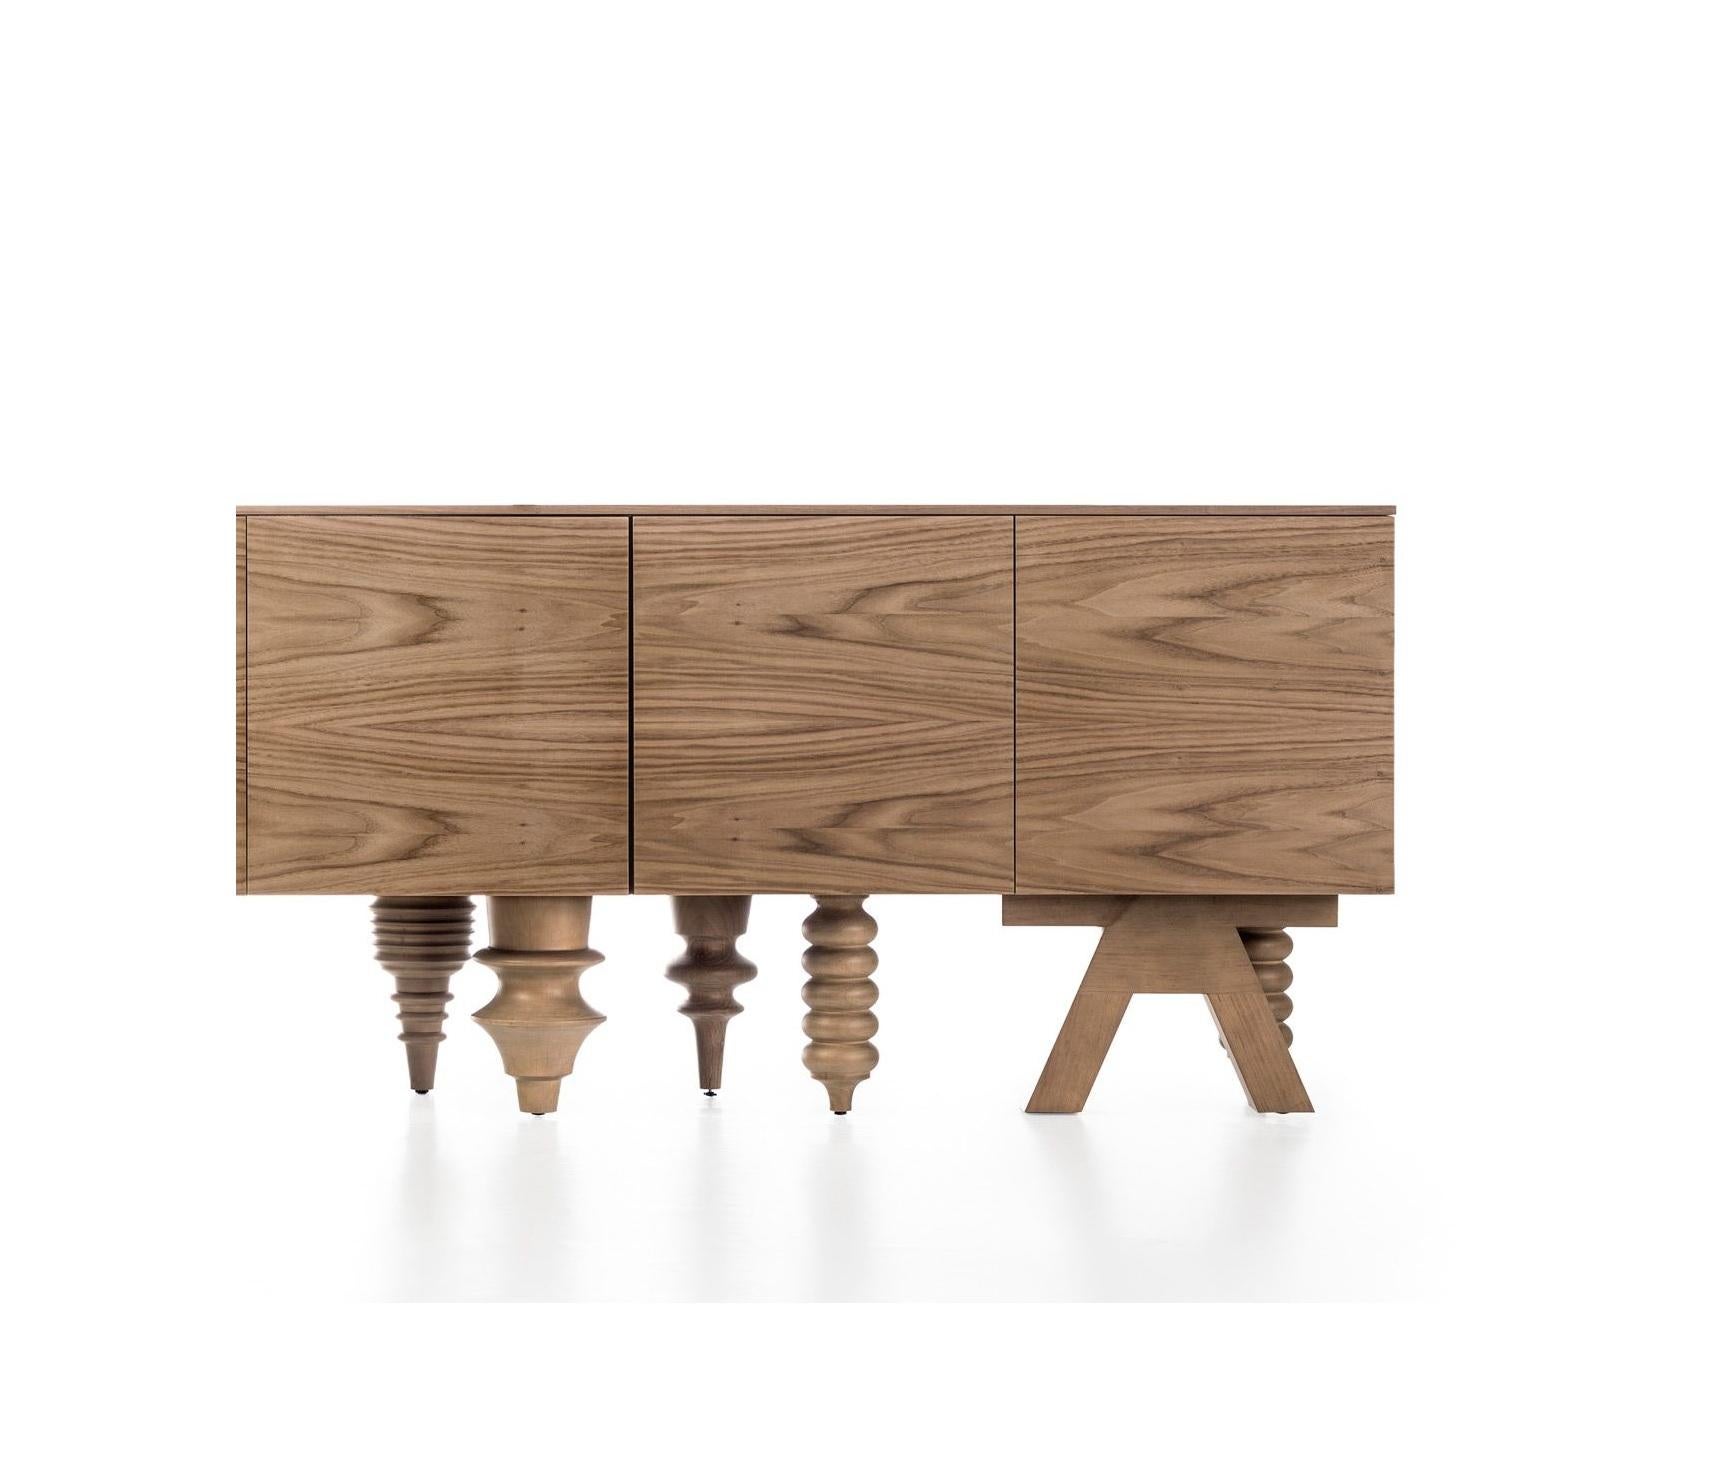 Walnut 1.5 meter Multileg cabinet by Jaime Hayon
Dimensions: D 50 x W 150 x H 80 cm 
Materials: container and frontal panels in 19mm MDF and shelves in 25mm MDF. Inside, back panel, doors, and tops in varnished or nature effect walnut. Legs in